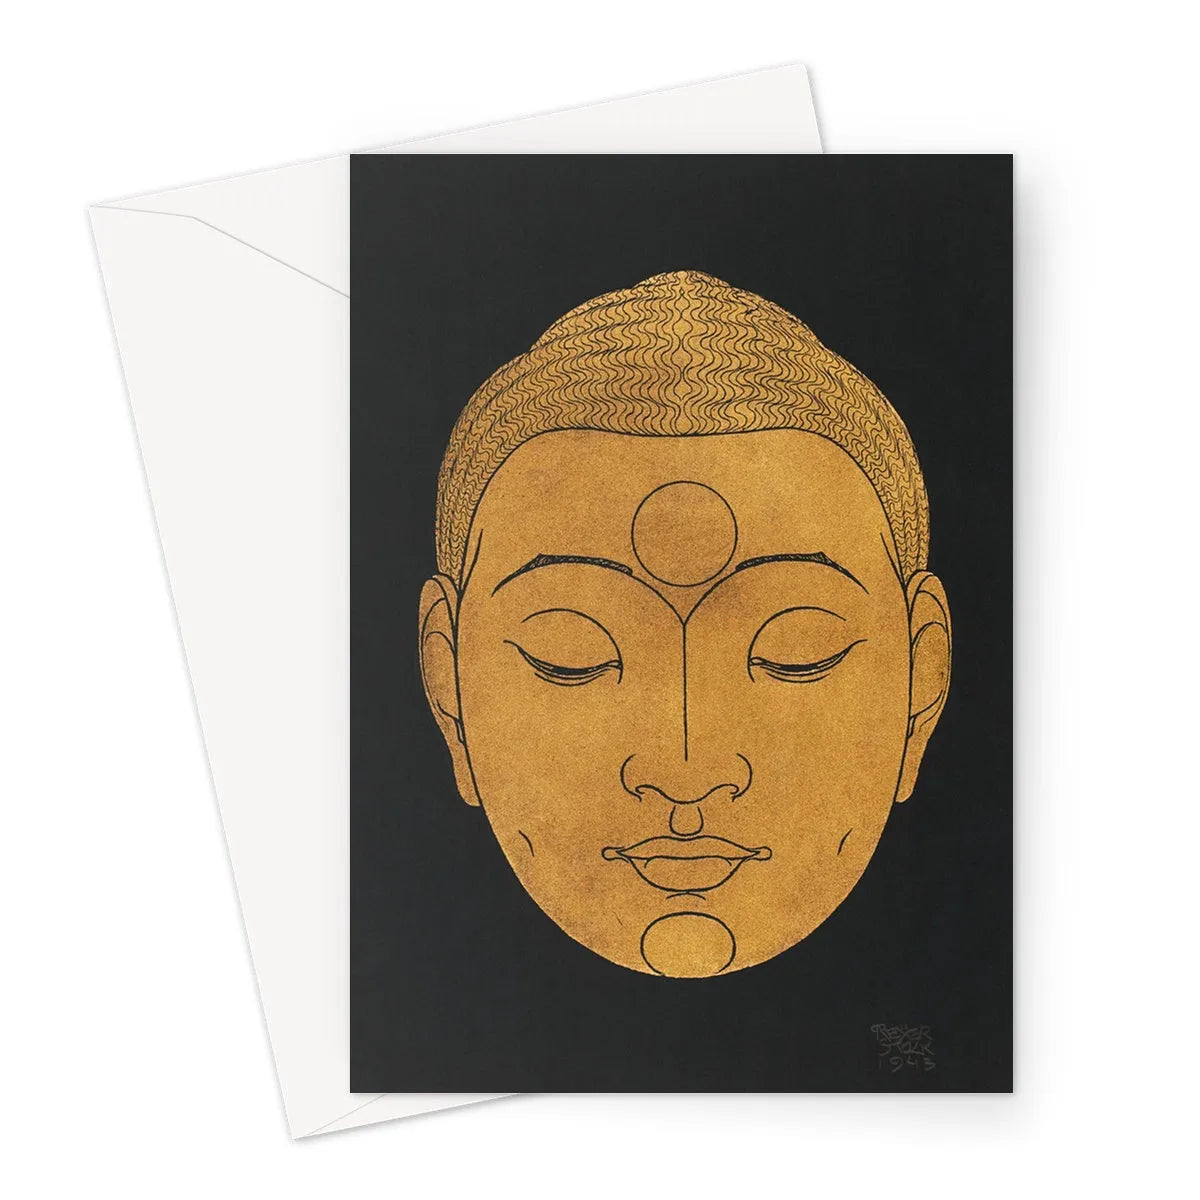 Head Of Buddha By Reijer Stolk Greeting Card - A5 Portrait / 1 Card - Notebooks & Notepads - Aesthetic Art